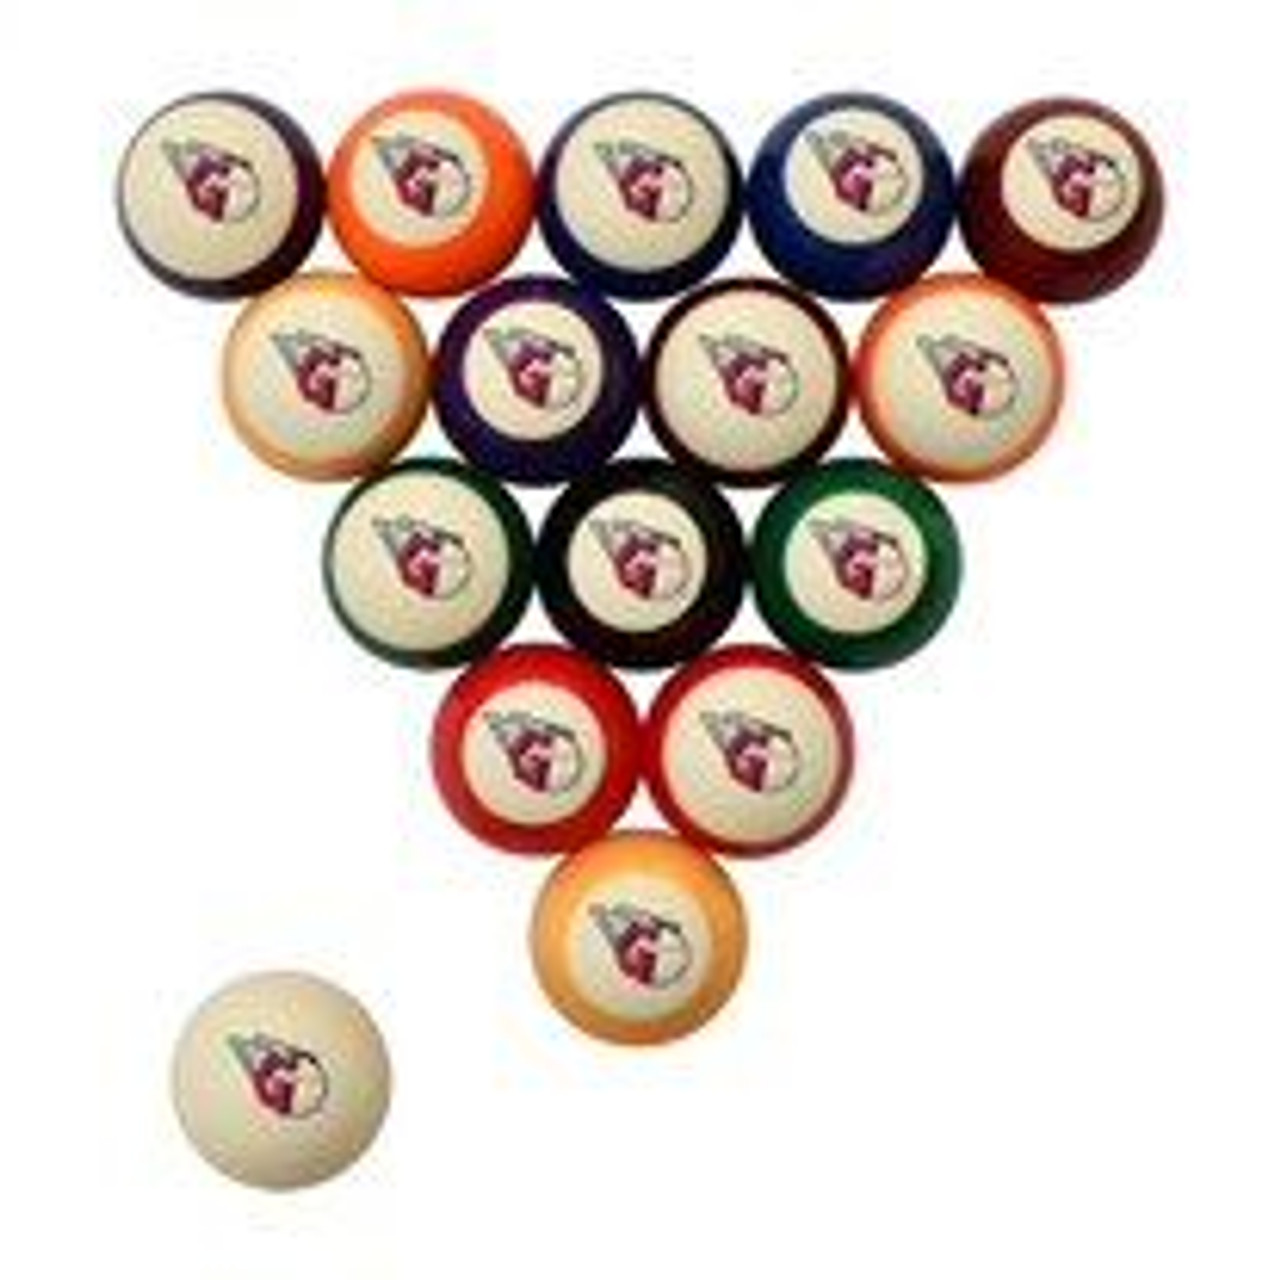 560-2034, 720801114071,Cle, Cleveland, Indians, Guardian=s, Retro, Billiard, Pool, Ball, Set, MLB, Imperial